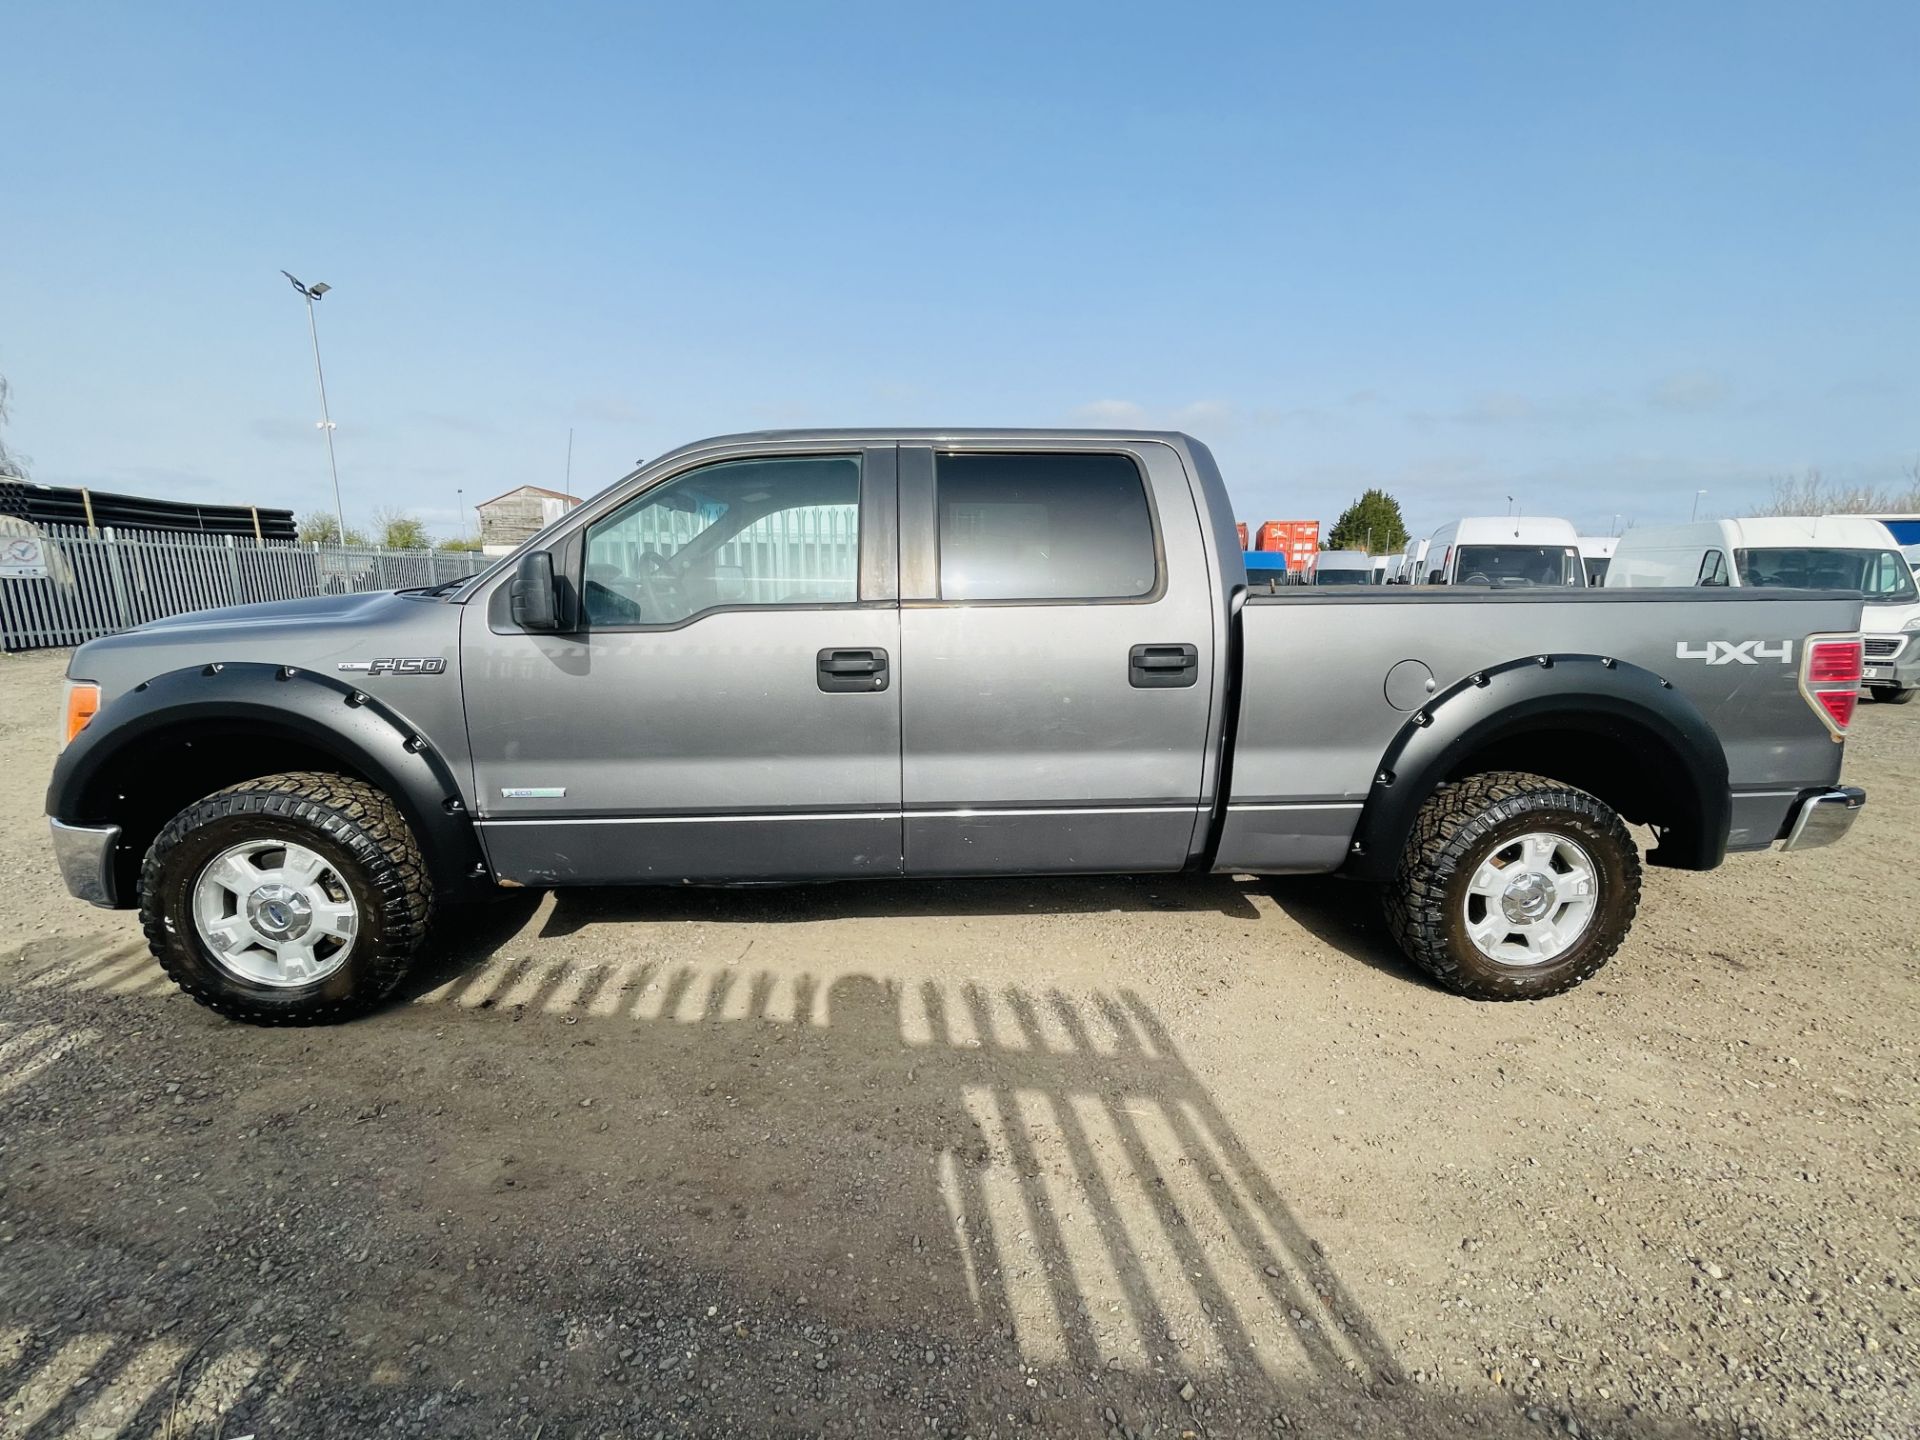 Ford F-150 XLT 3.5L V6 Ecoboost 'Super-Crew' 4WD - '2012 Year' Air con** NO VAT SAVE 20%** - Image 6 of 28